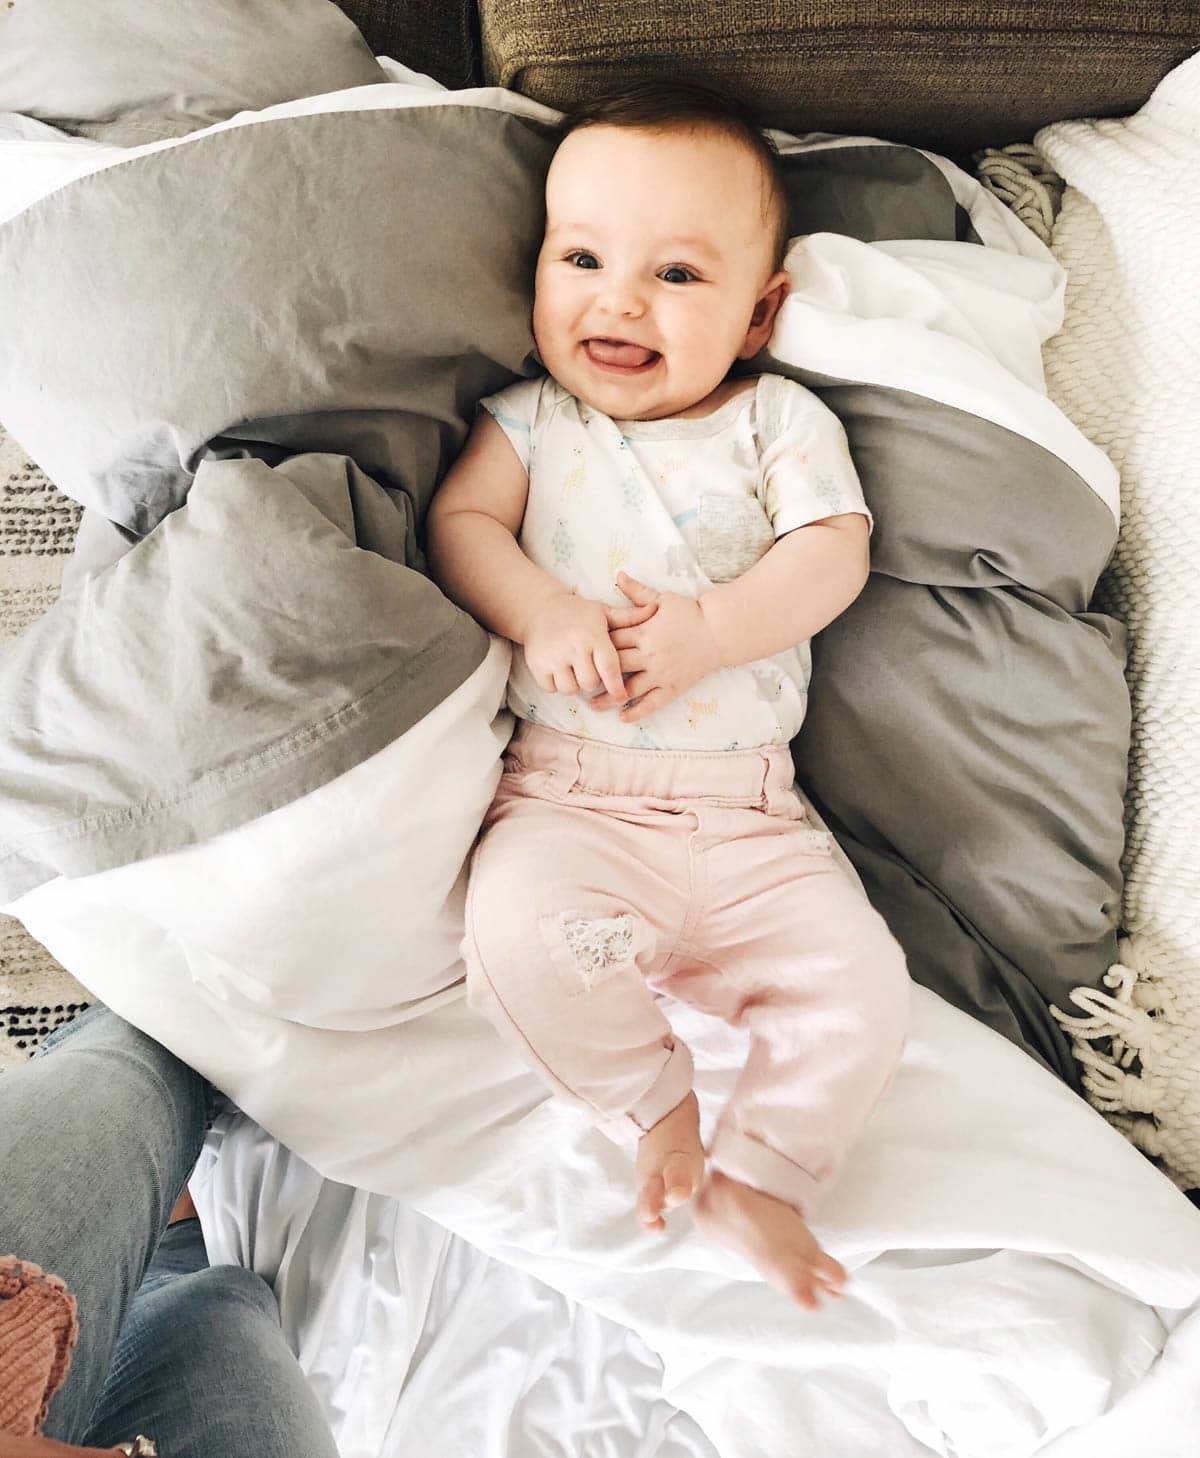 A smiling baby lying in pillows on a bed.